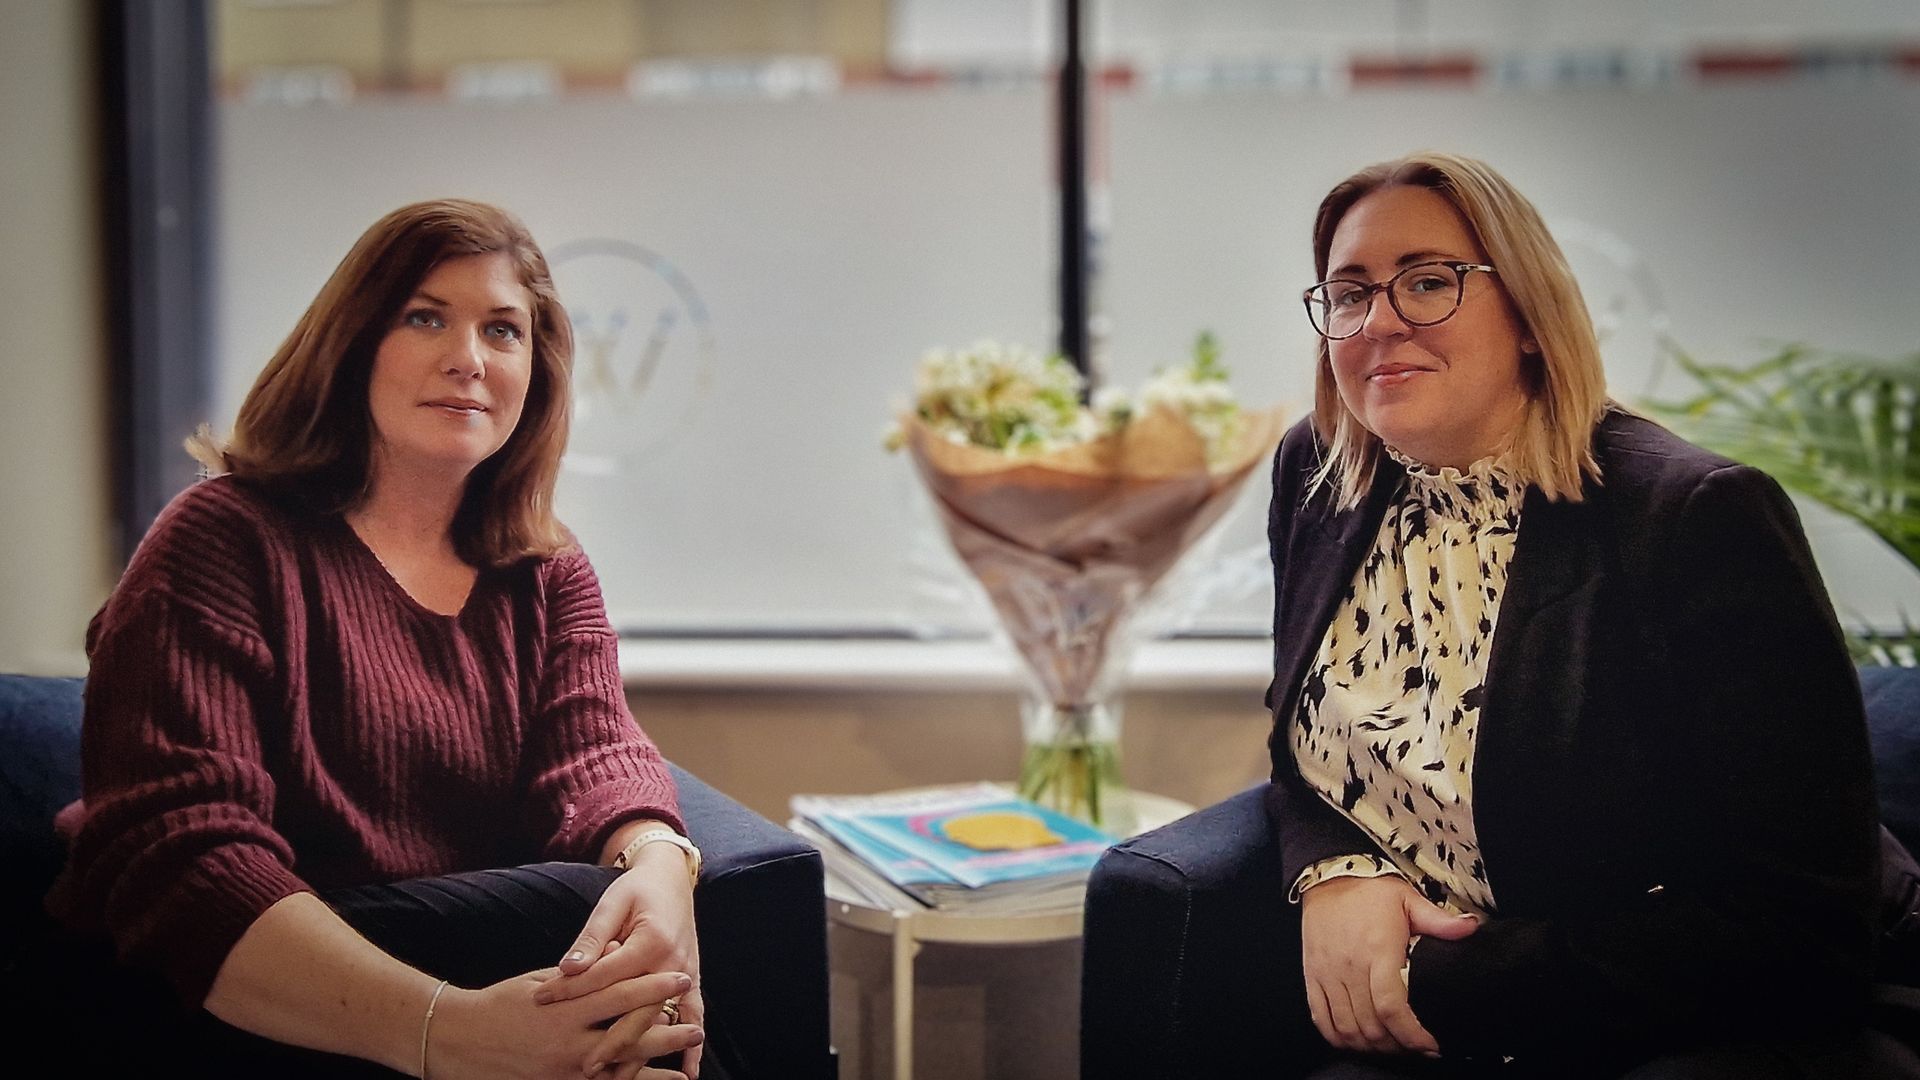 Charlotte O'Driscoll and Claire Cousins - Oxford Conveyancing Experts for Woodstock Legal Services